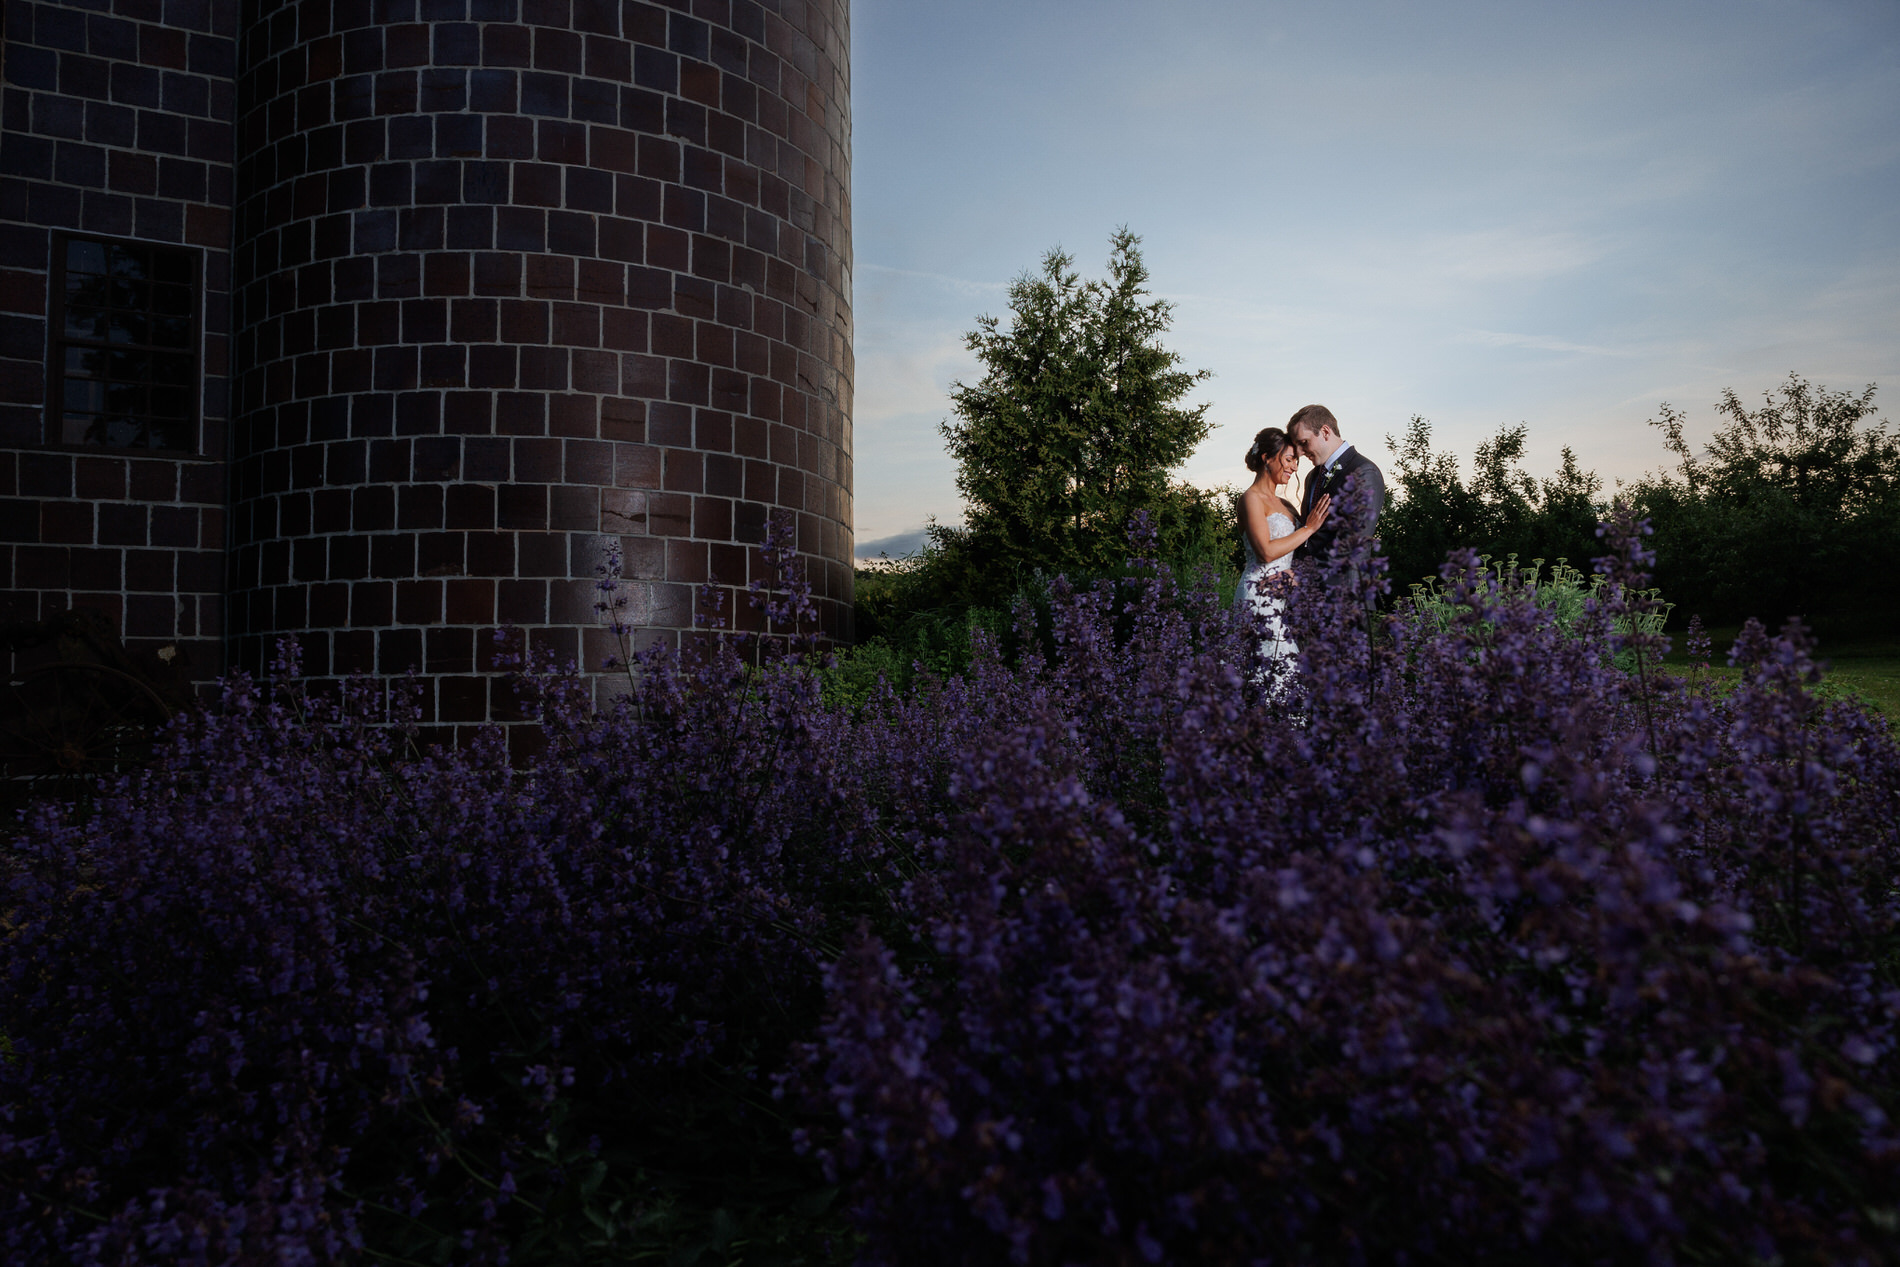 A romantic image of a couple embracing among purple flowers at twilight, with a distinctive, cylindrical brick building in the background, evoking the charm of Western Massachusetts wedding venues.